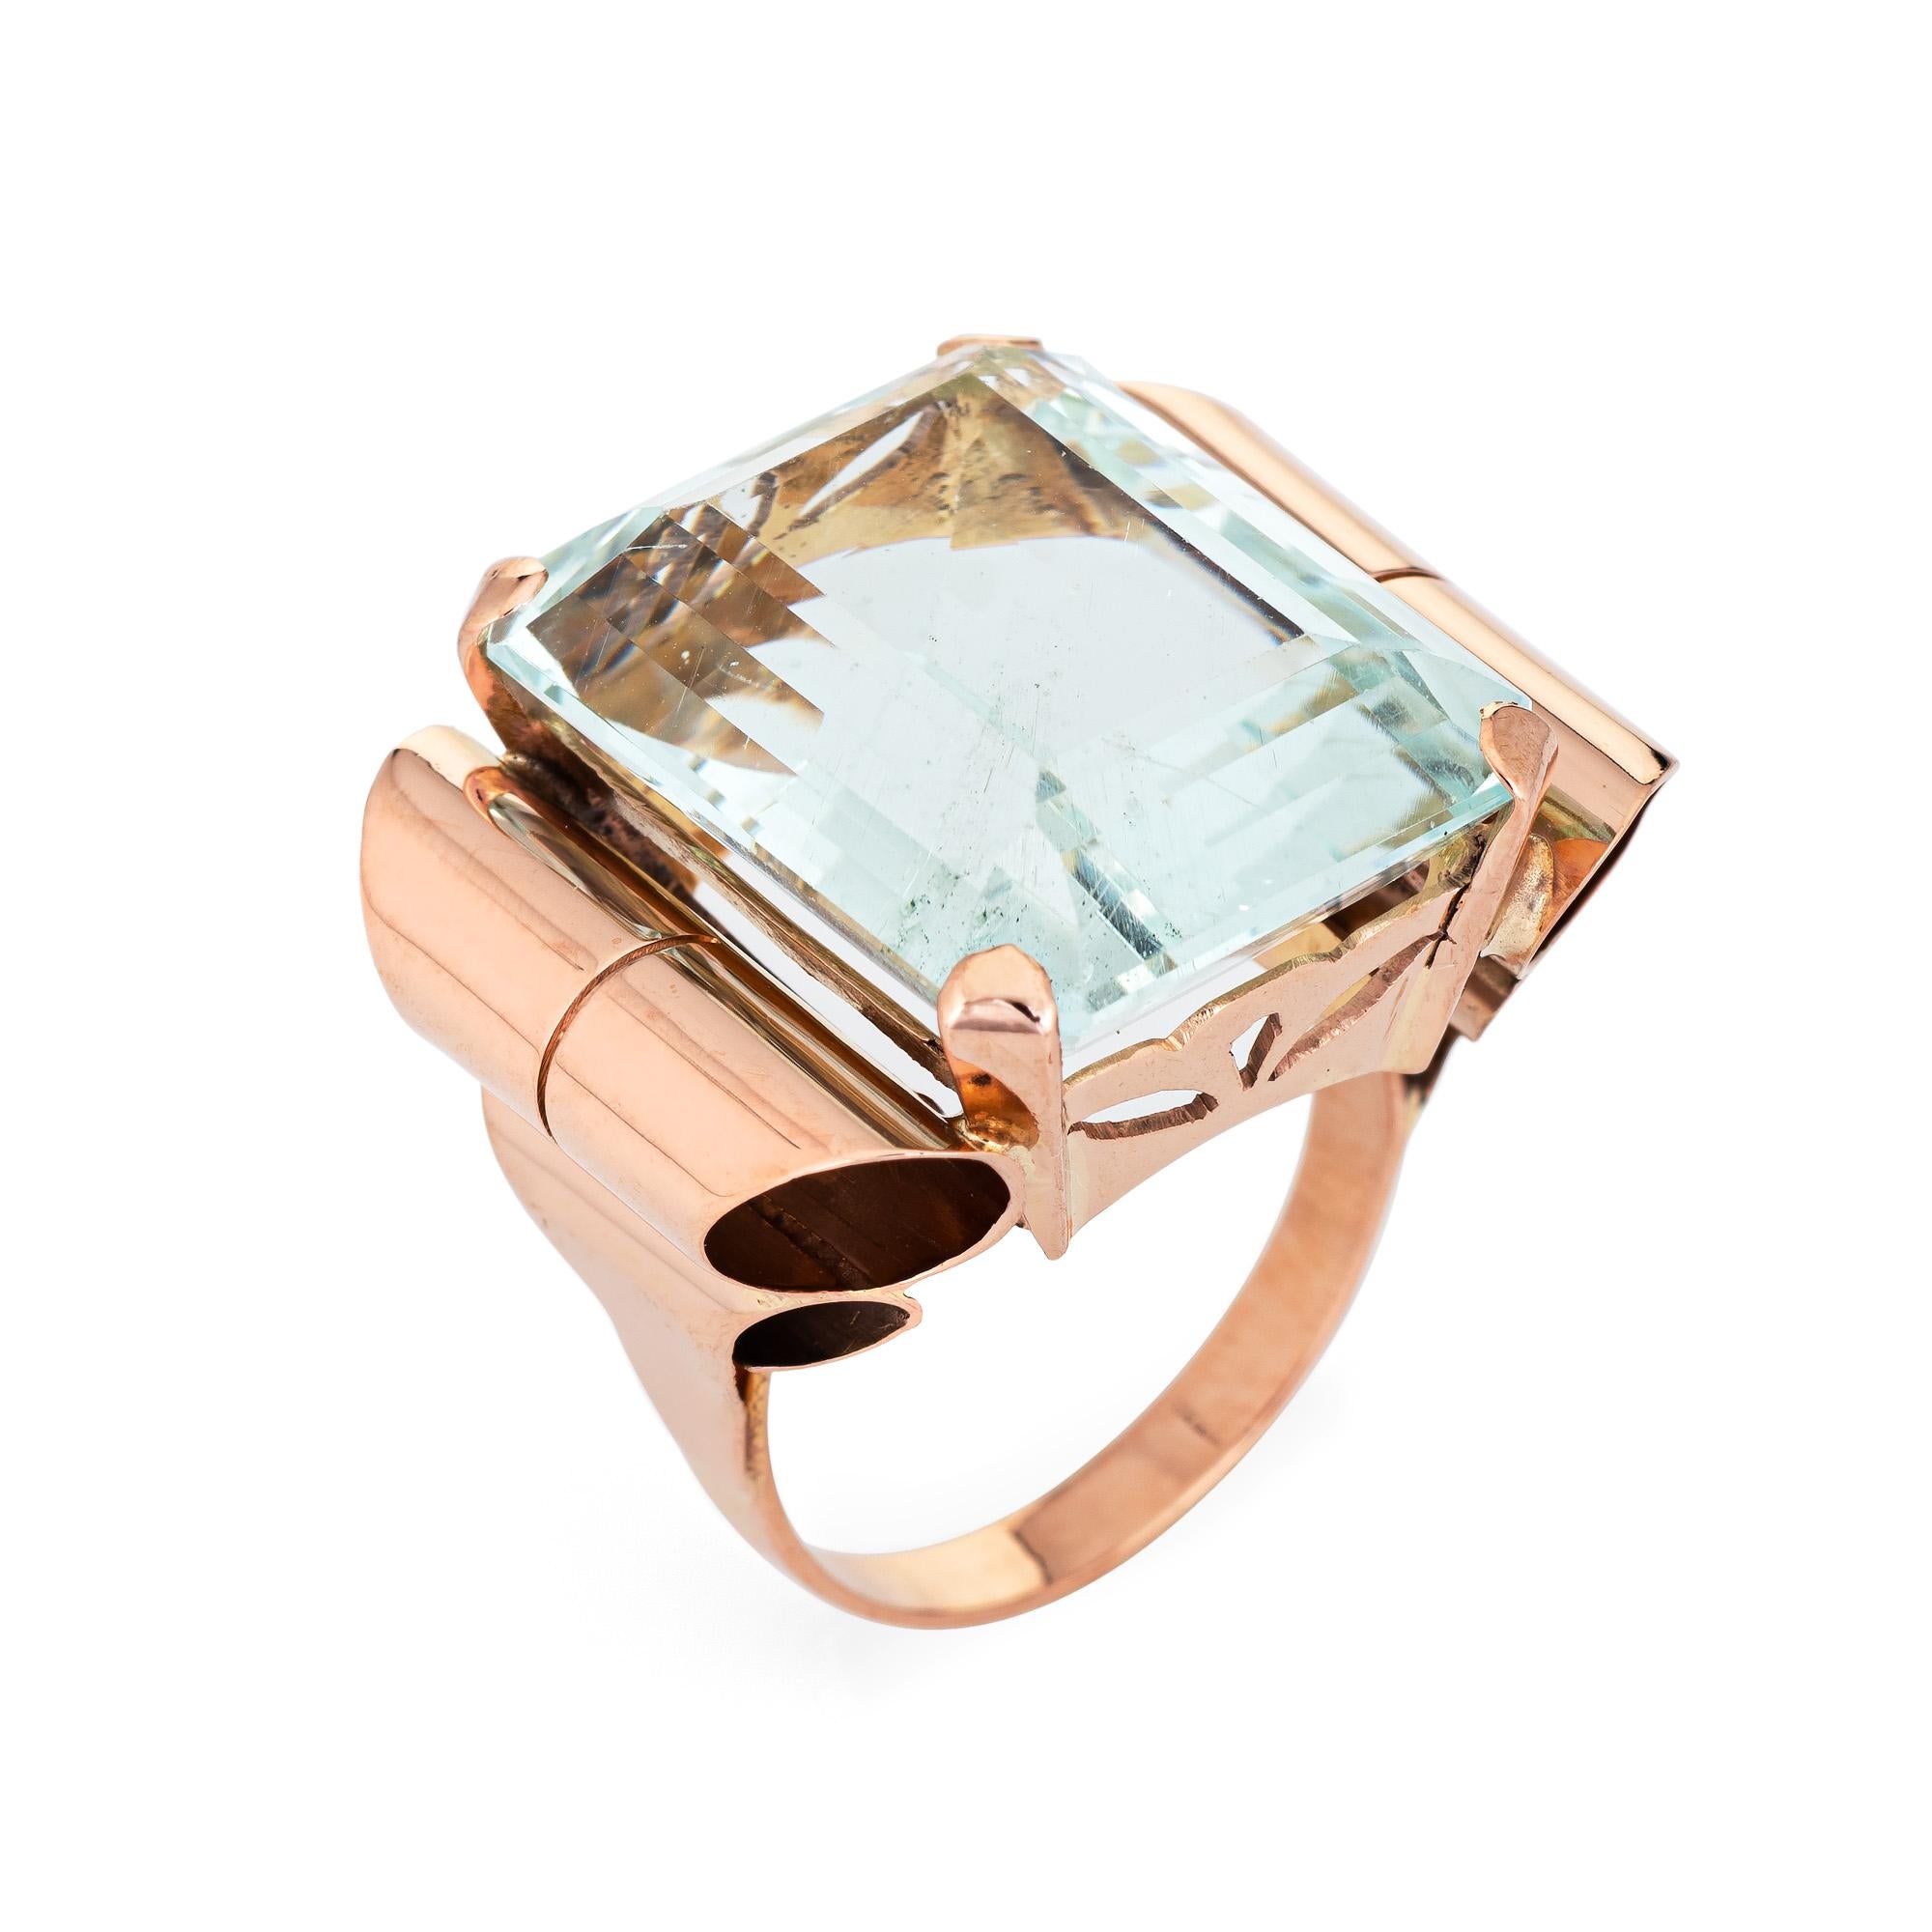 Stylish Retro vintage aquamarine cocktail ring (circa 1940s) crafted in 14 karat rose gold. 

Emerald cut aquamarine measures 20mm x 15mm (estimated at 20 carats). The aquamarine is in very good condition and free of cracks or chips. 

The clear as